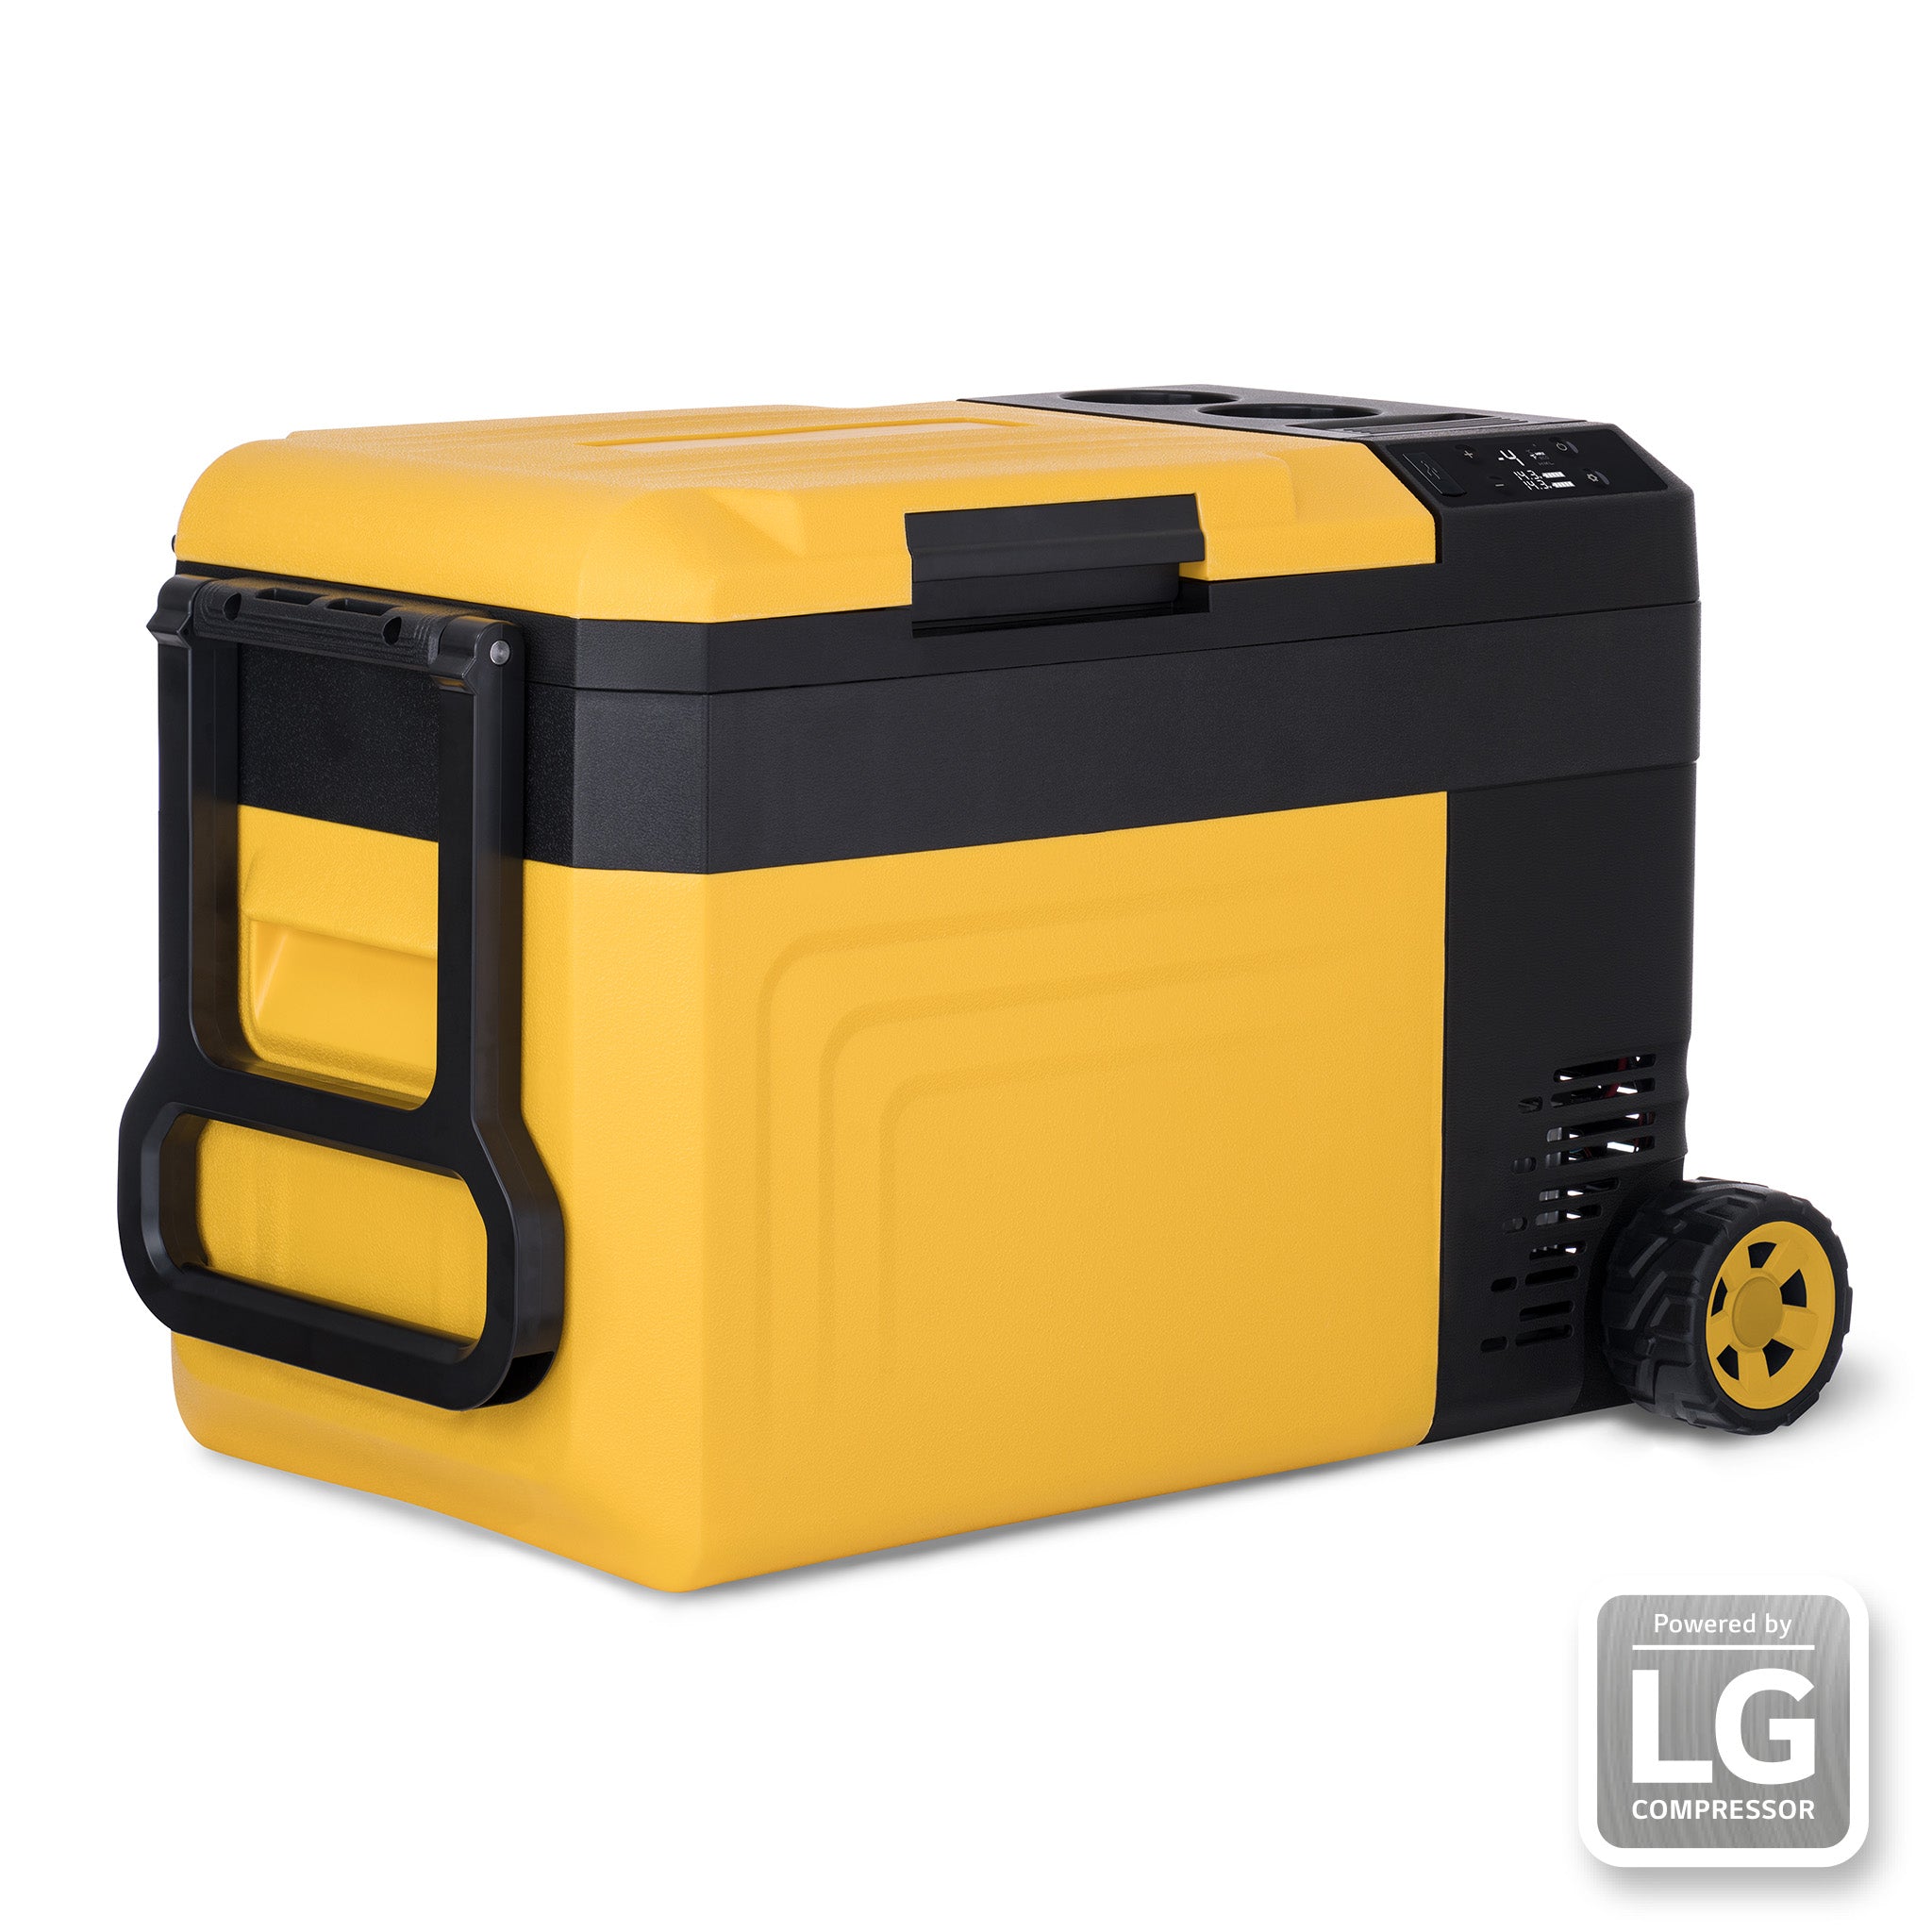 Lunch Box Cooler - Stanley Lunch Box Cooler 